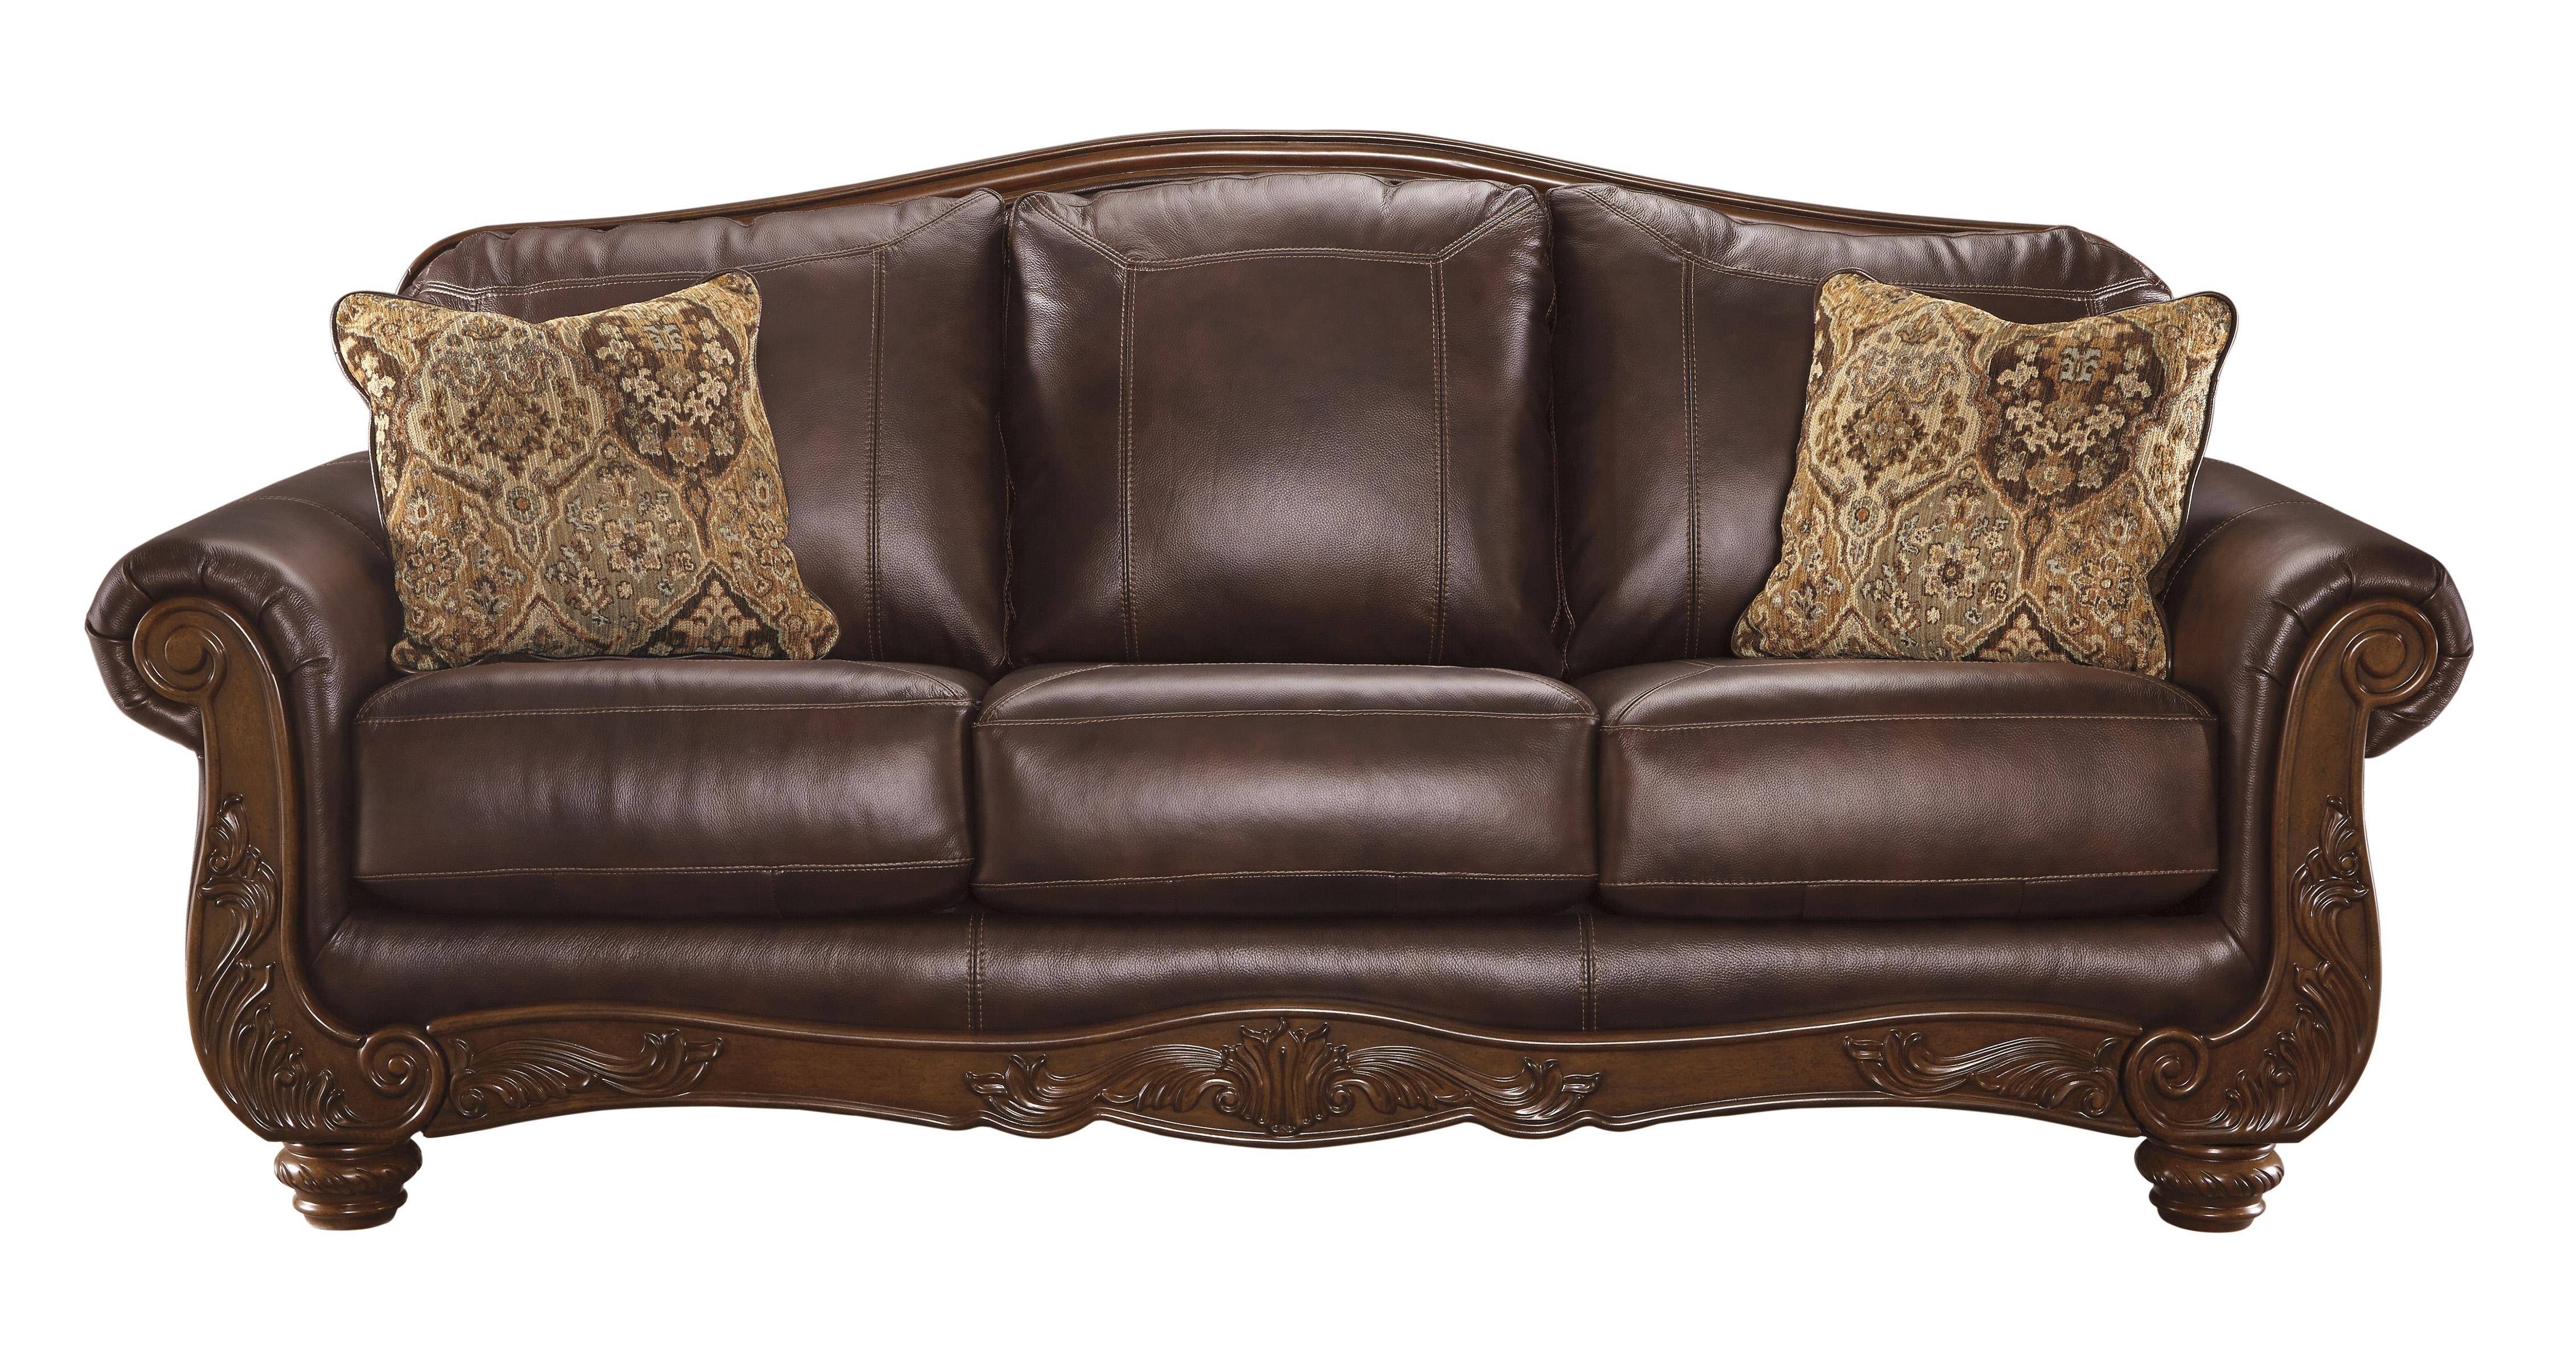 ashley furniture red brown leather sofa